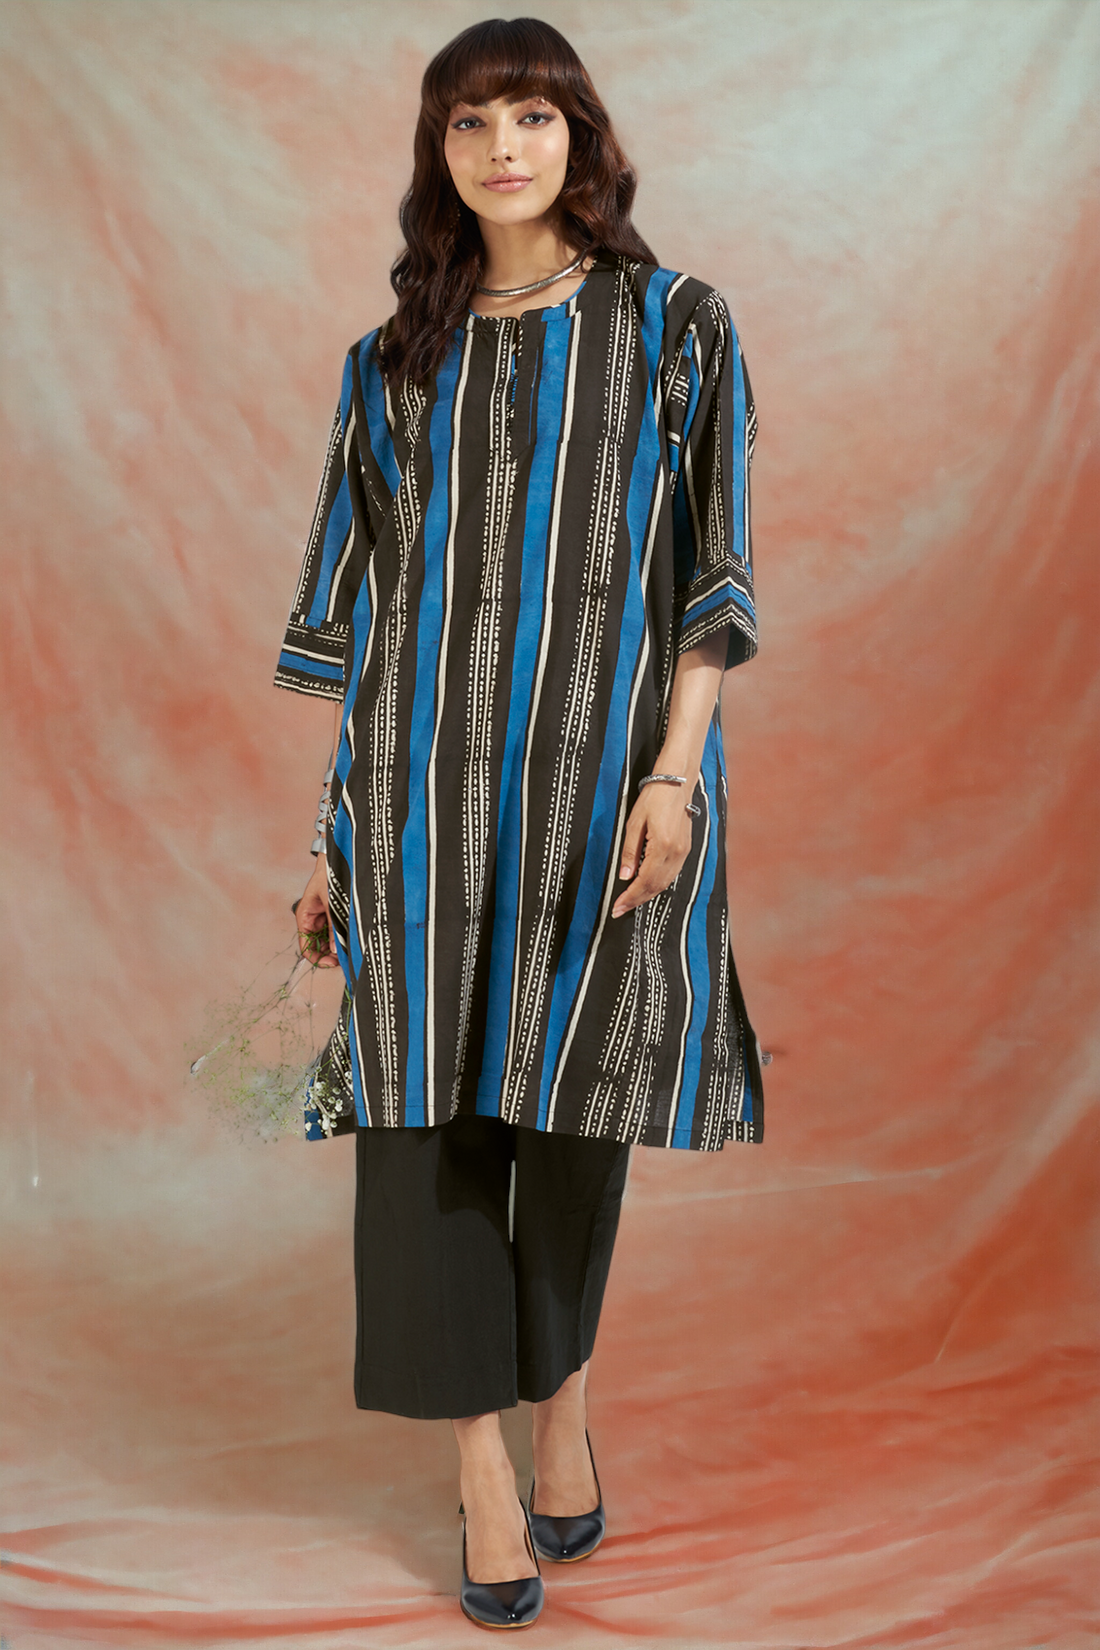 leisure tunic - eclectic blue & midnight stripes